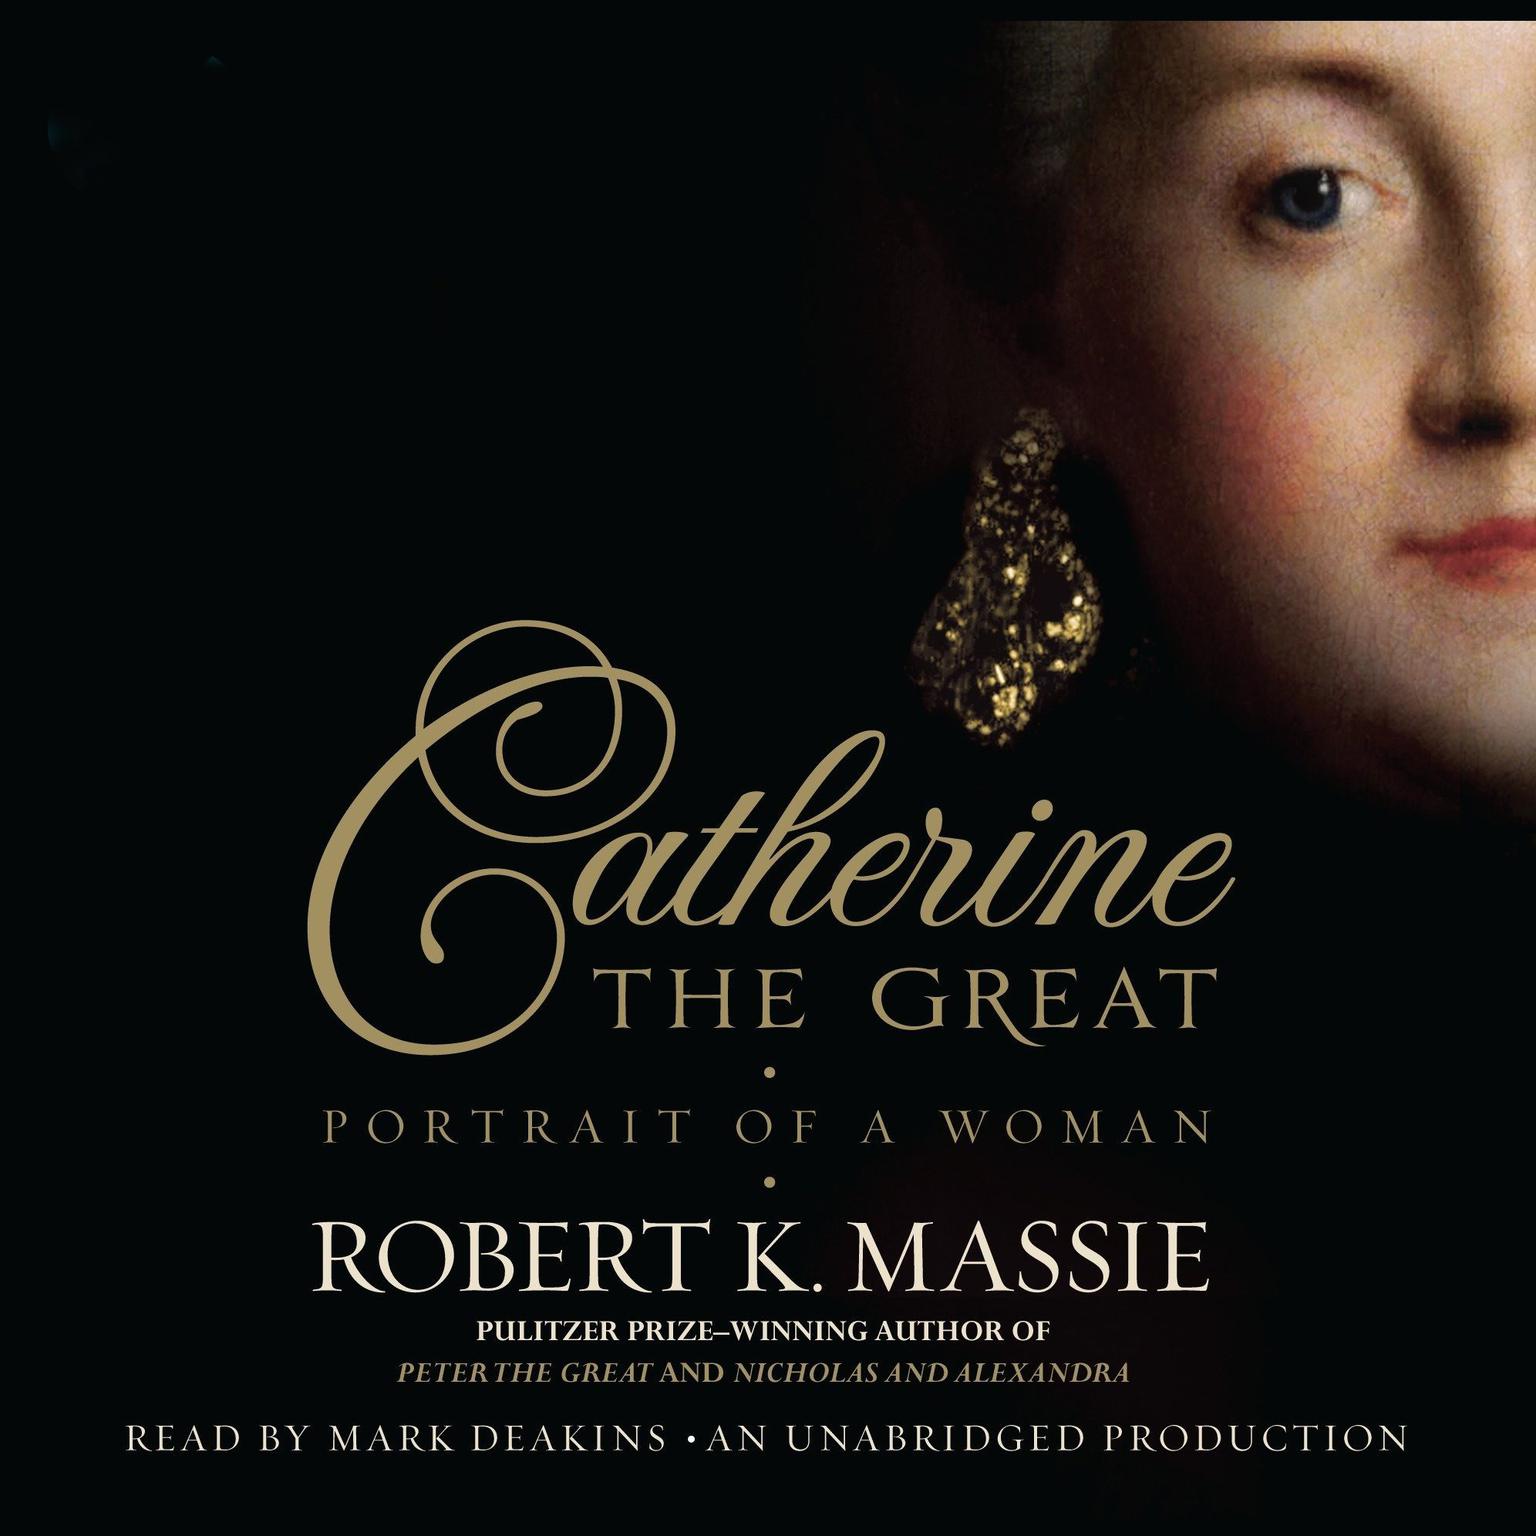 Catherine the Great: Portrait of a Woman: Portrait of a Woman Audiobook, by Robert K. Massie